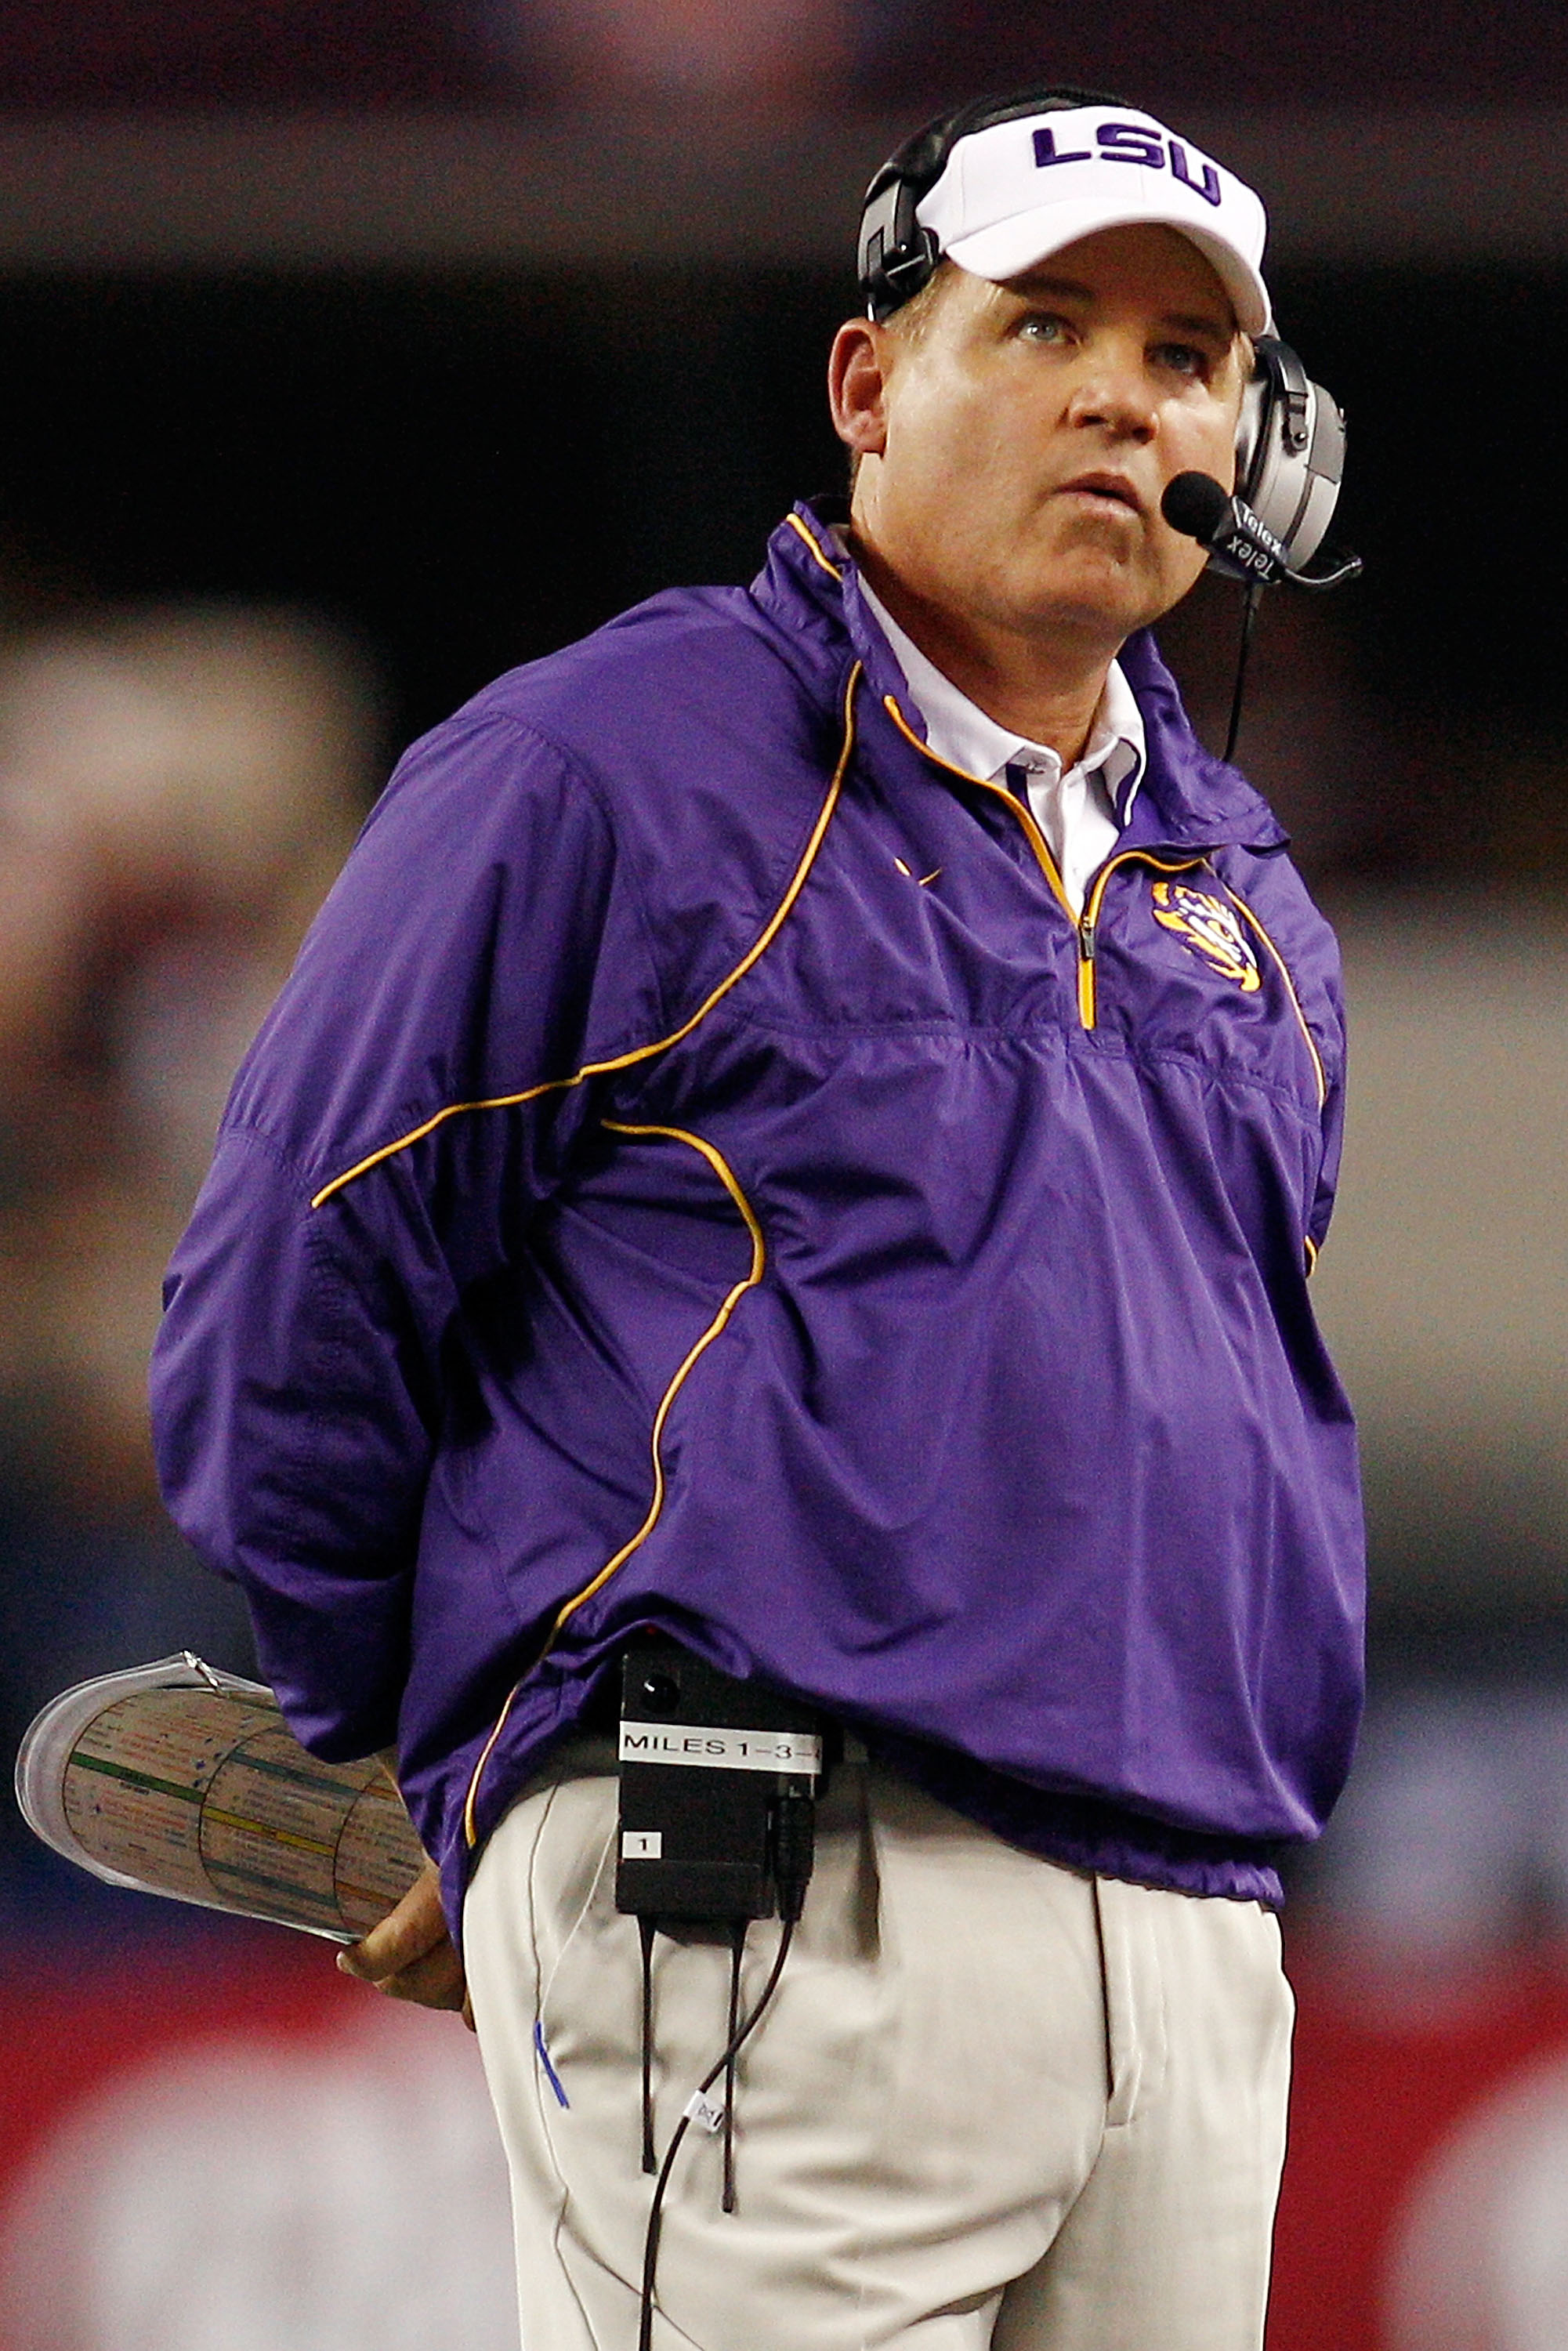 ARLINGTON, TX - JANUARY 07:  Head coach Les Miles of the Louisiana State University Tigers watches the score board during a timeout against the Texas A&M Aggies during the AT&T Cotton Bowl at Cowboys Stadium on January 7, 2011 in Arlington, Texas.  (Photo